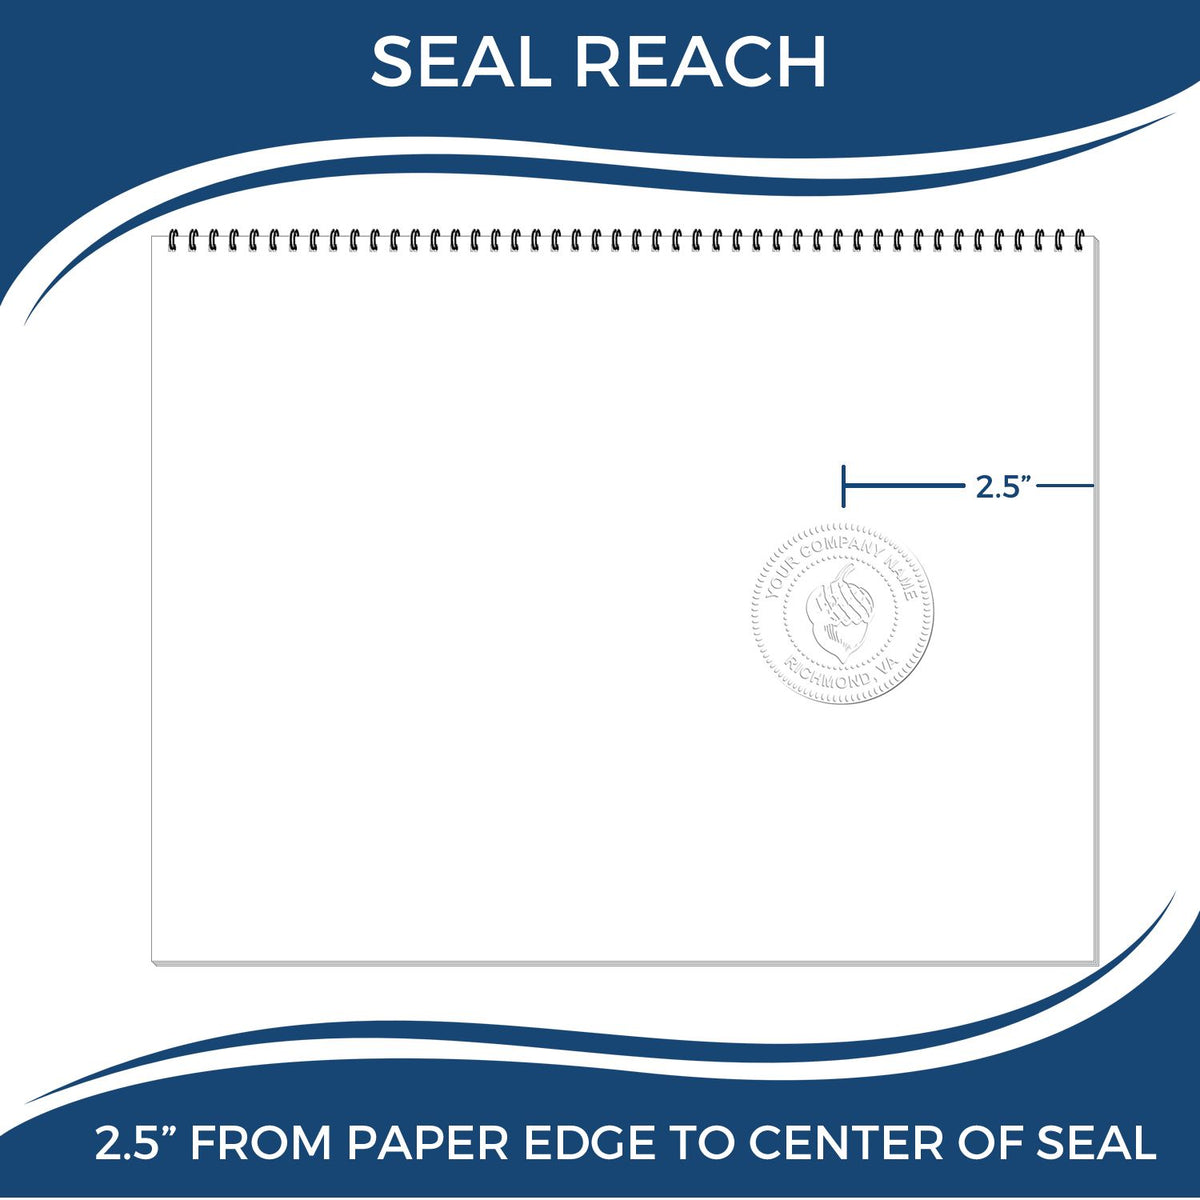 An infographic showing the seal reach which is represented by a ruler and a miniature seal image of the Long Reach Montana Land Surveyor Seal